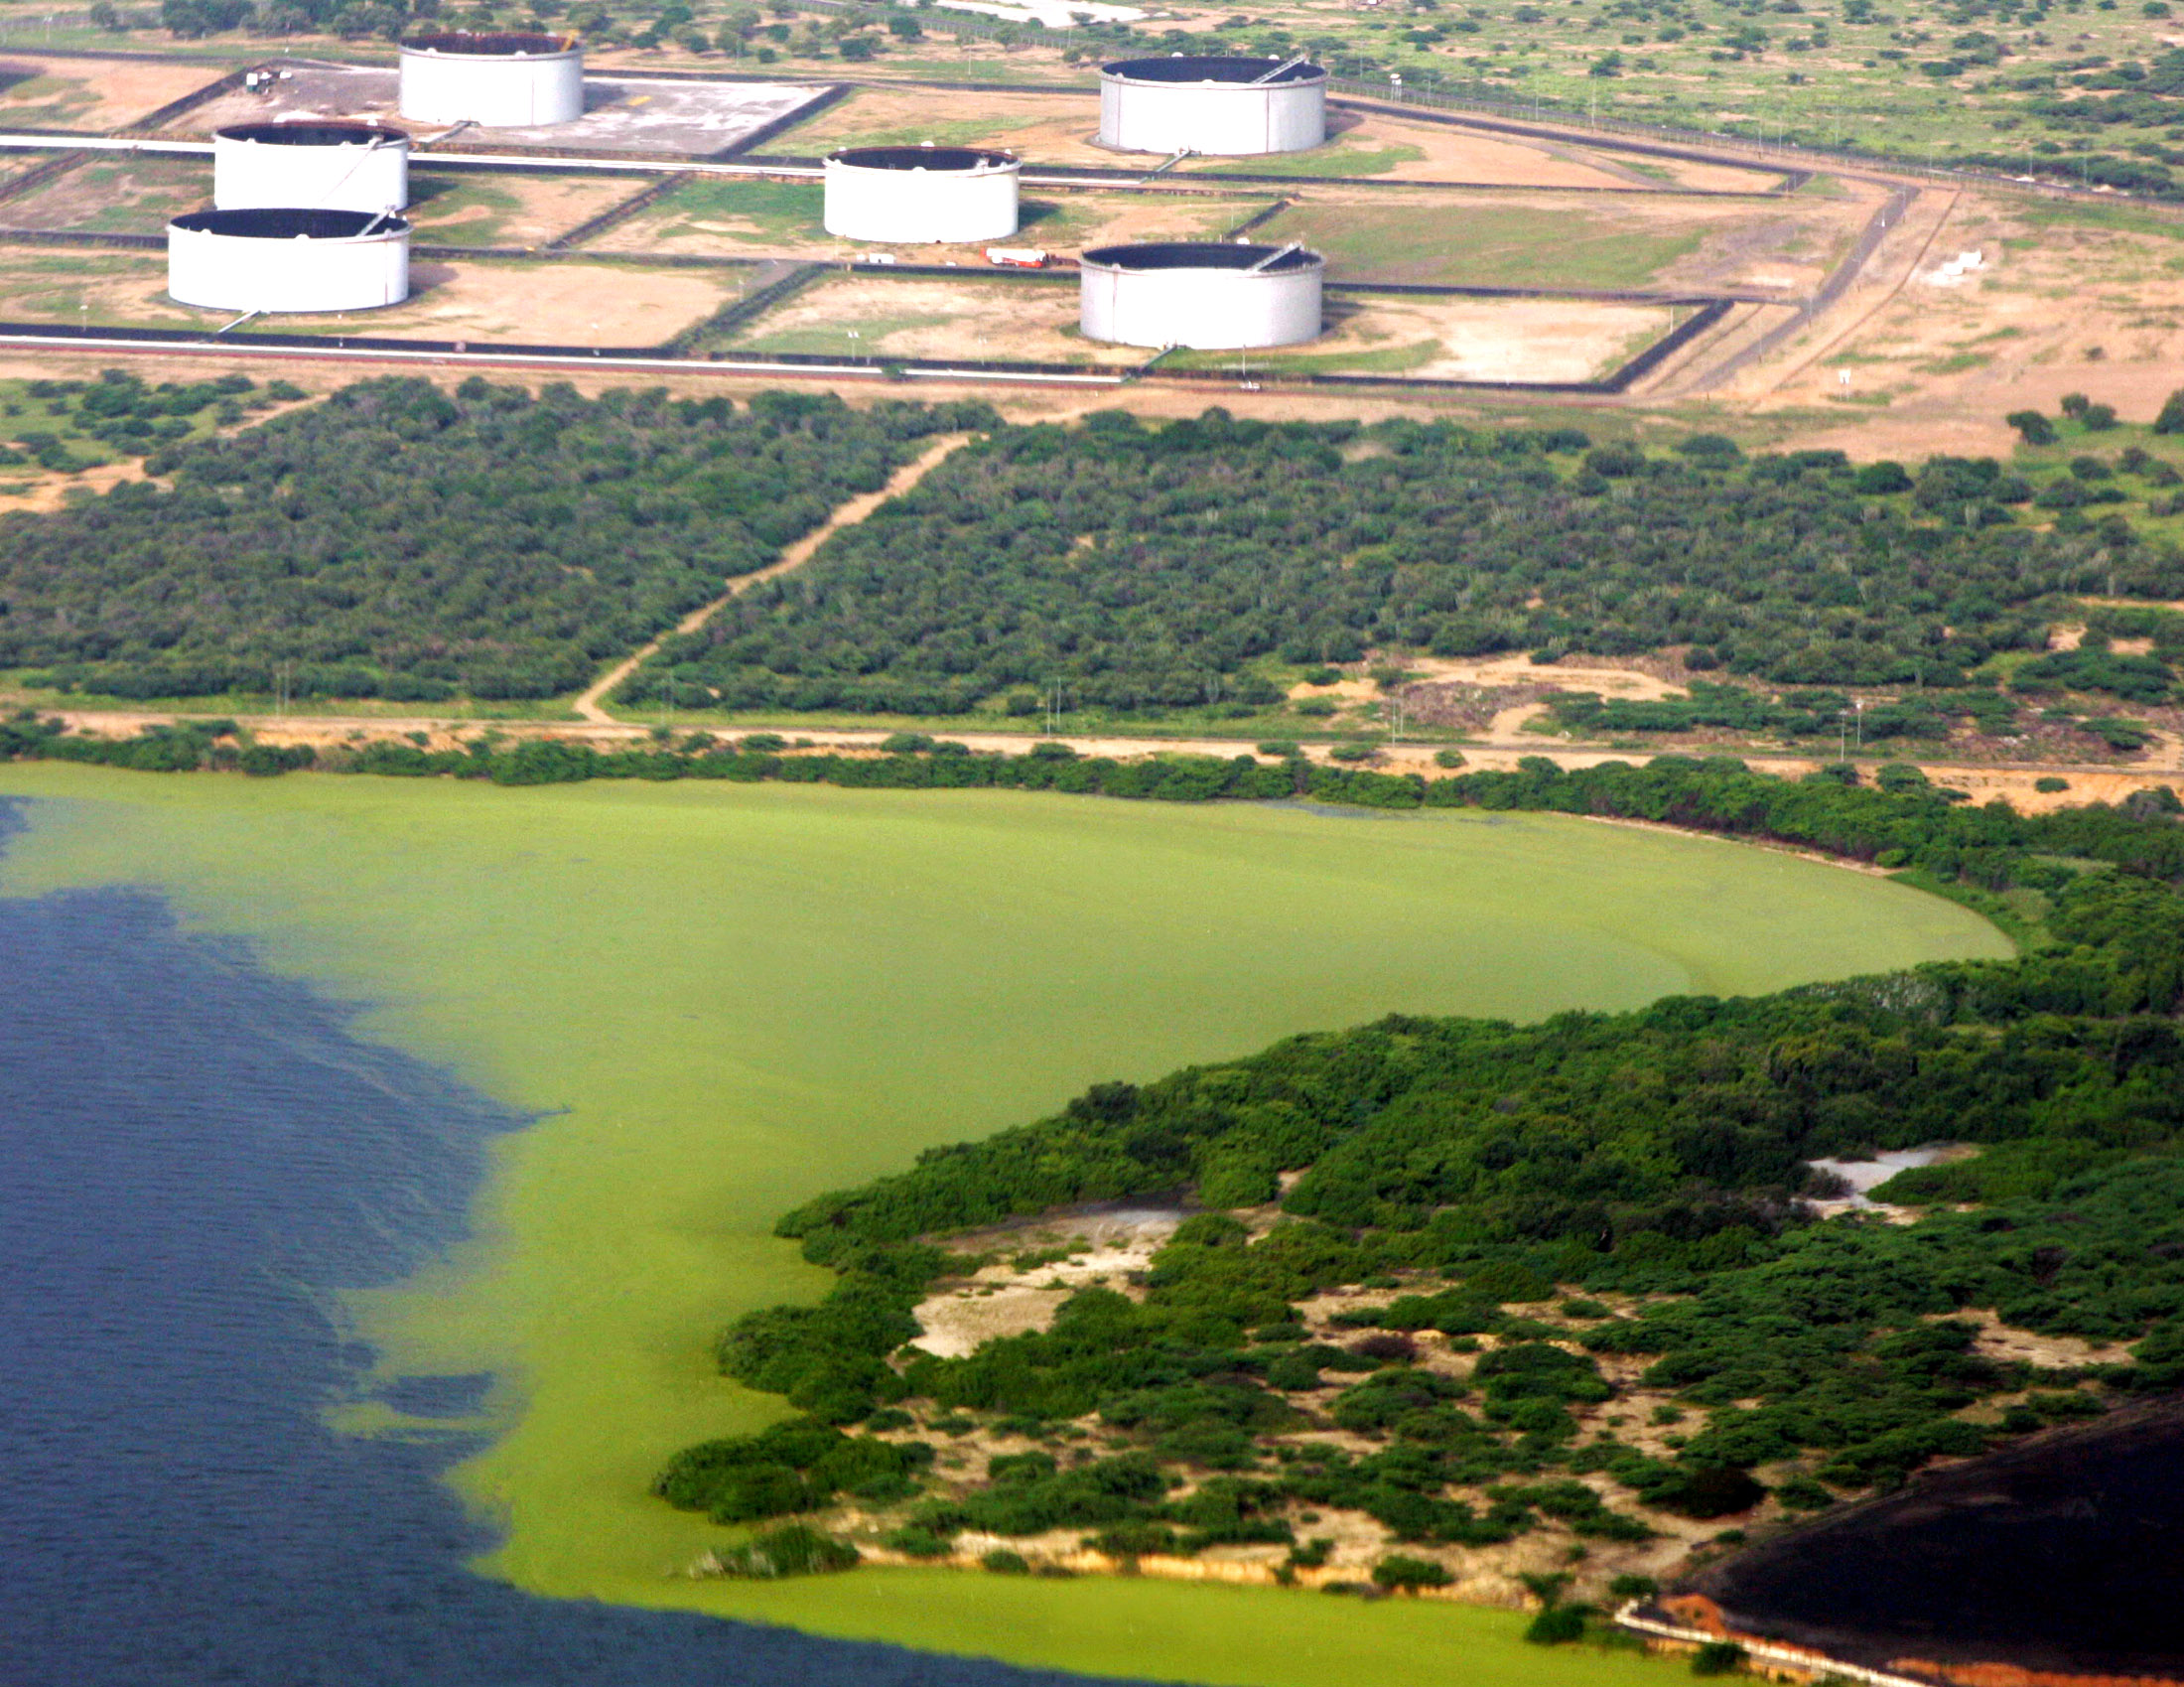 AN AREAL VIEW OF THE POLLUTED MARACAIBO LAKE IN VENEZUELA.